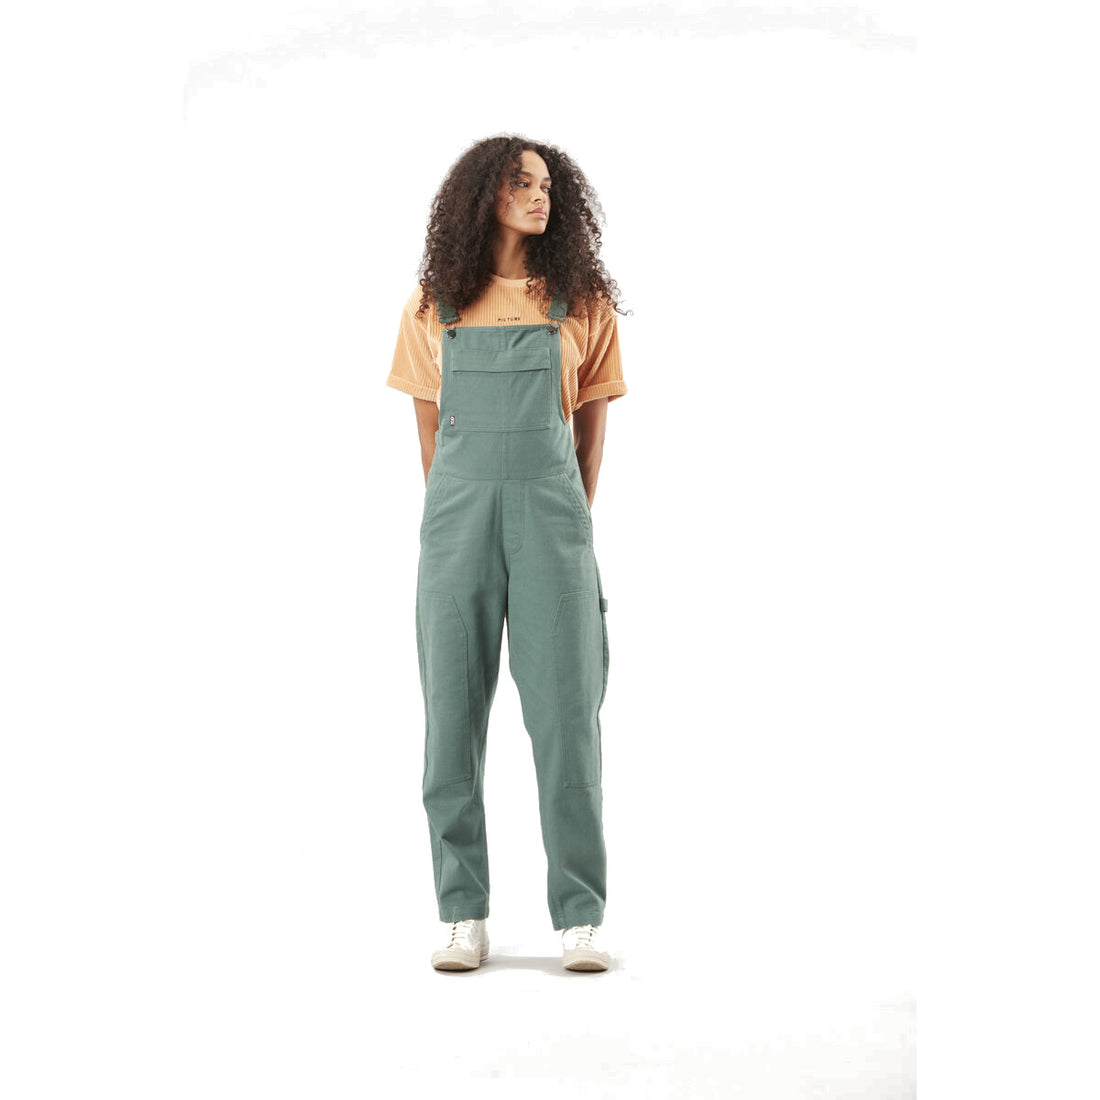 Picture Organic Clothing Bibee Drill Overalls